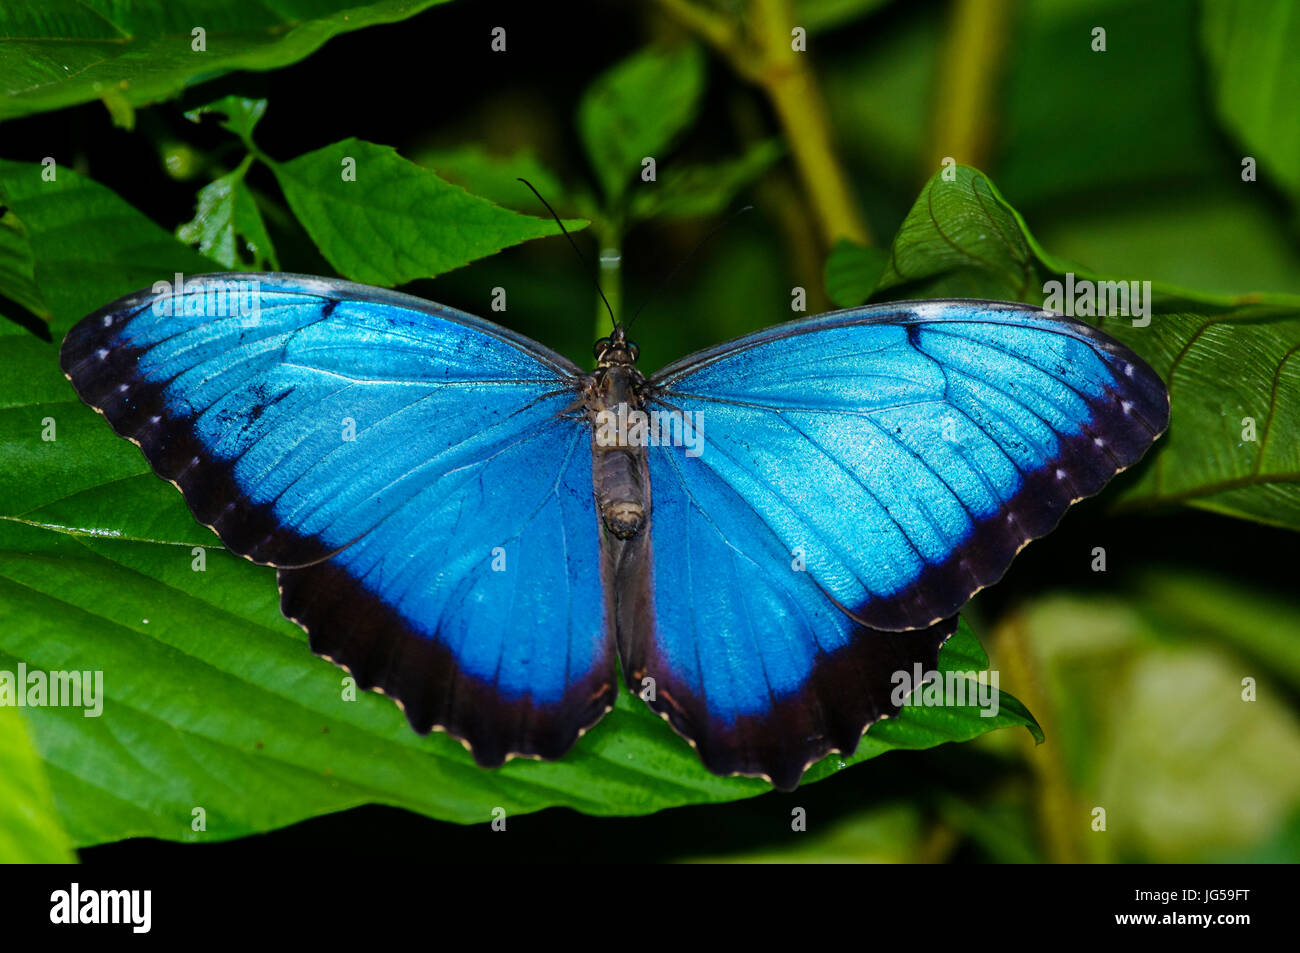 Common blue morpho butterfly on a green leaf image taken in Panama Stock Photo